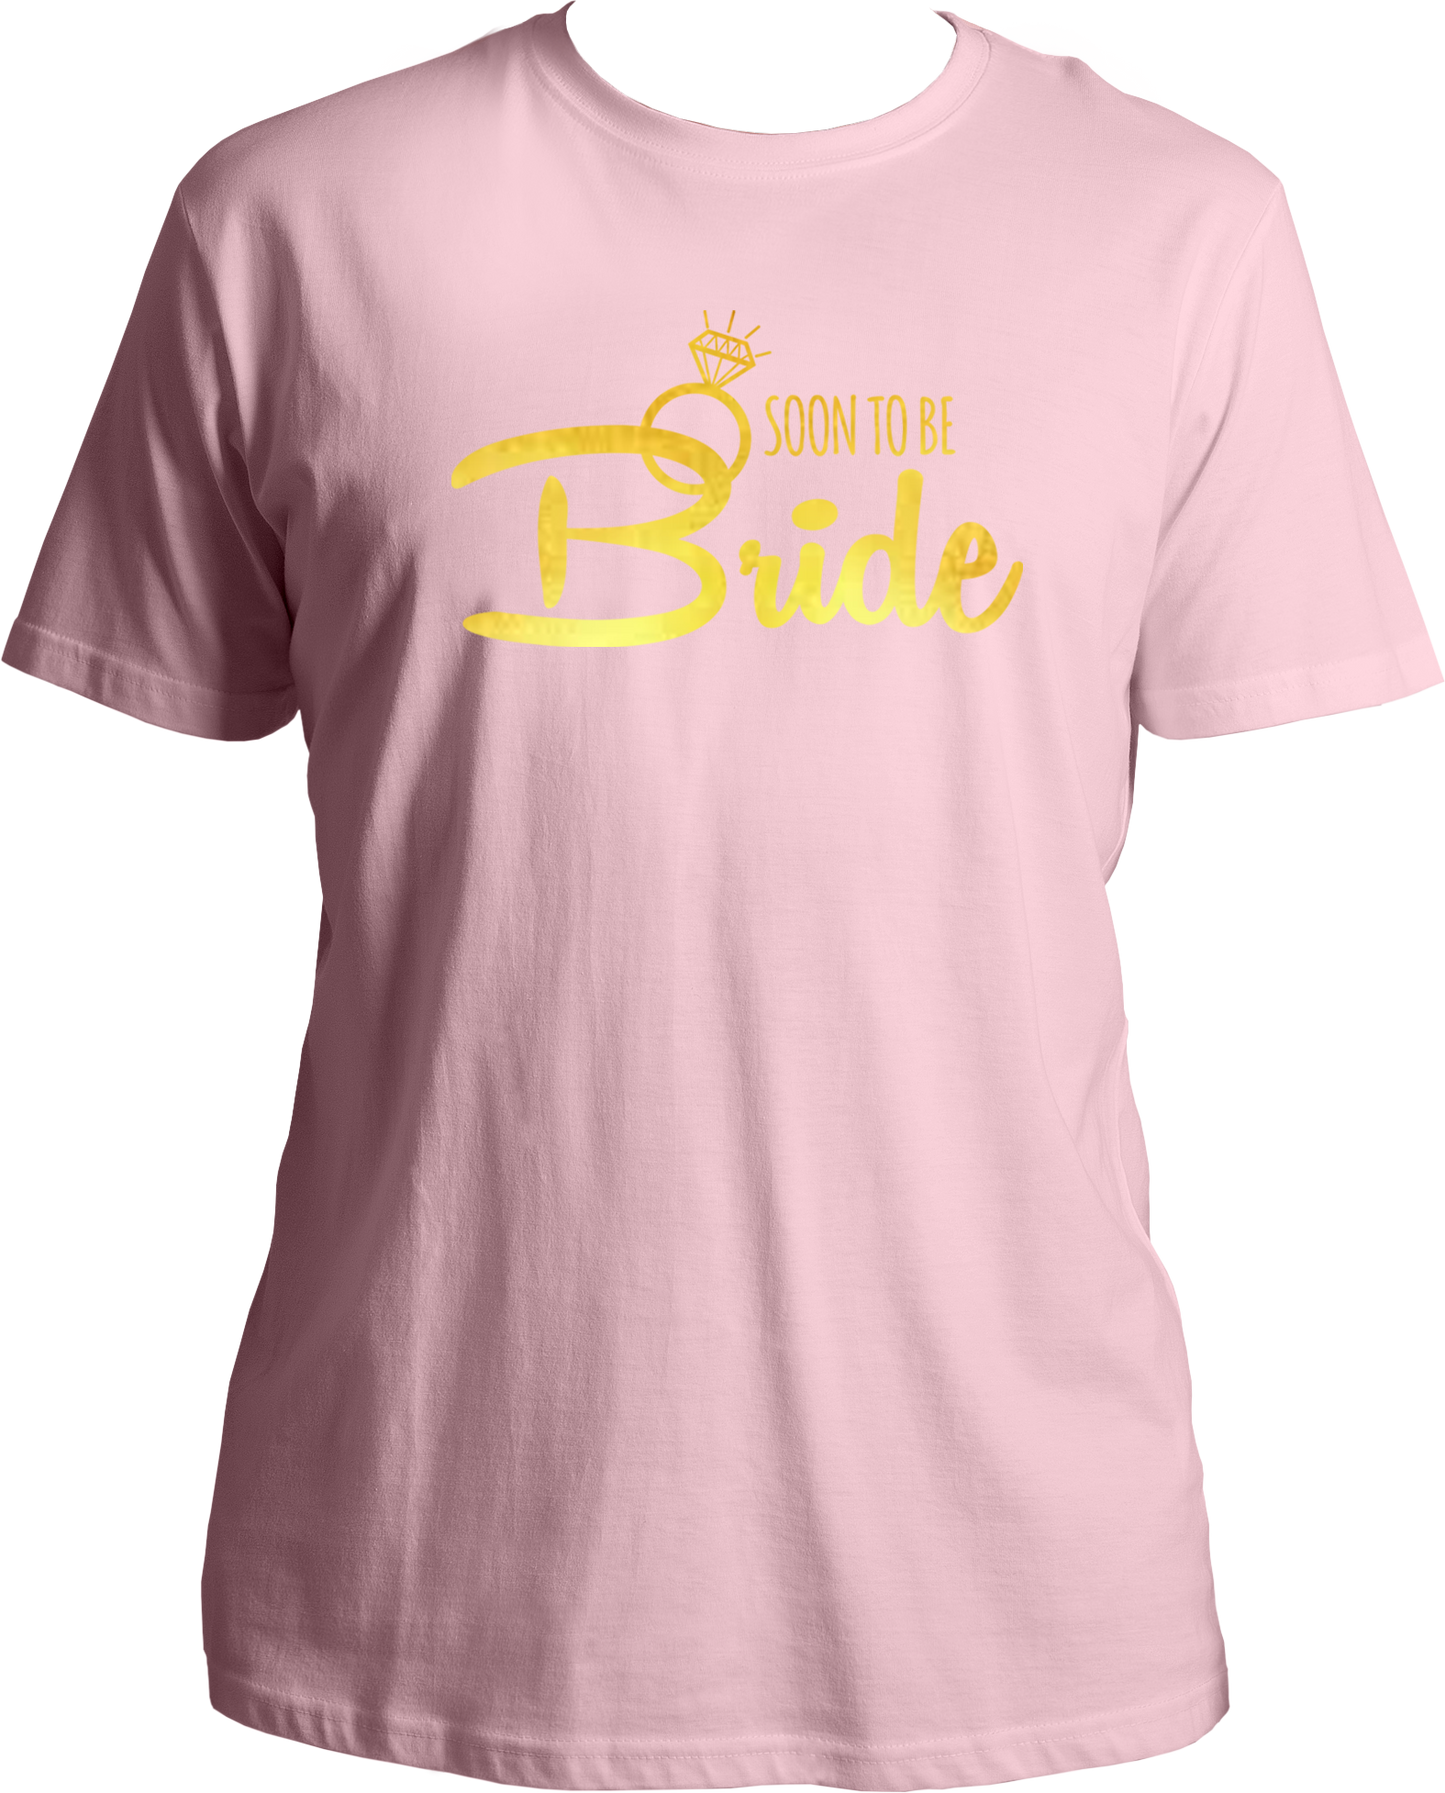 Soon To Be Bride (Golden Print) Unisex T-Shirts